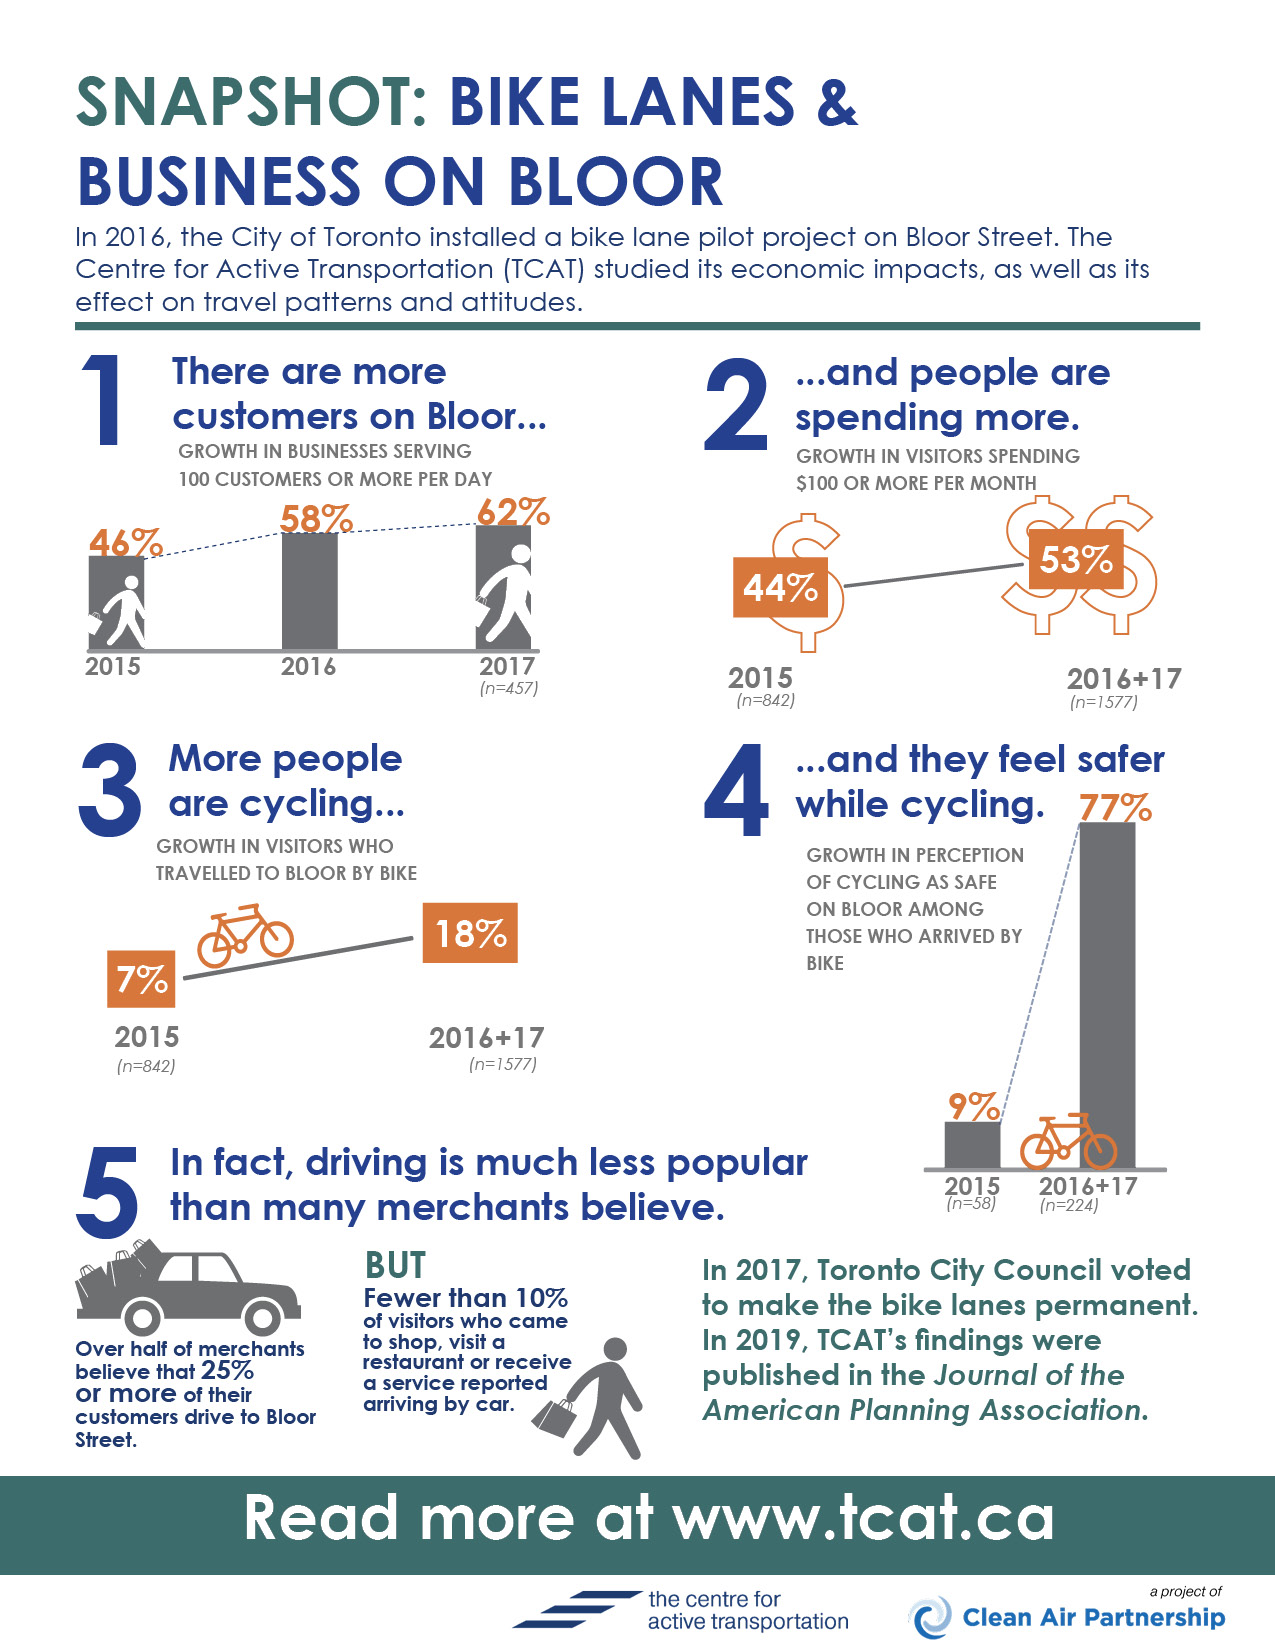 One page snapshot of study results: there are more customers on Bloor, and they're spending more money. There are also more people cycling and they feel safer while cycling. In fact, driving is much less popular than most merchants believe.